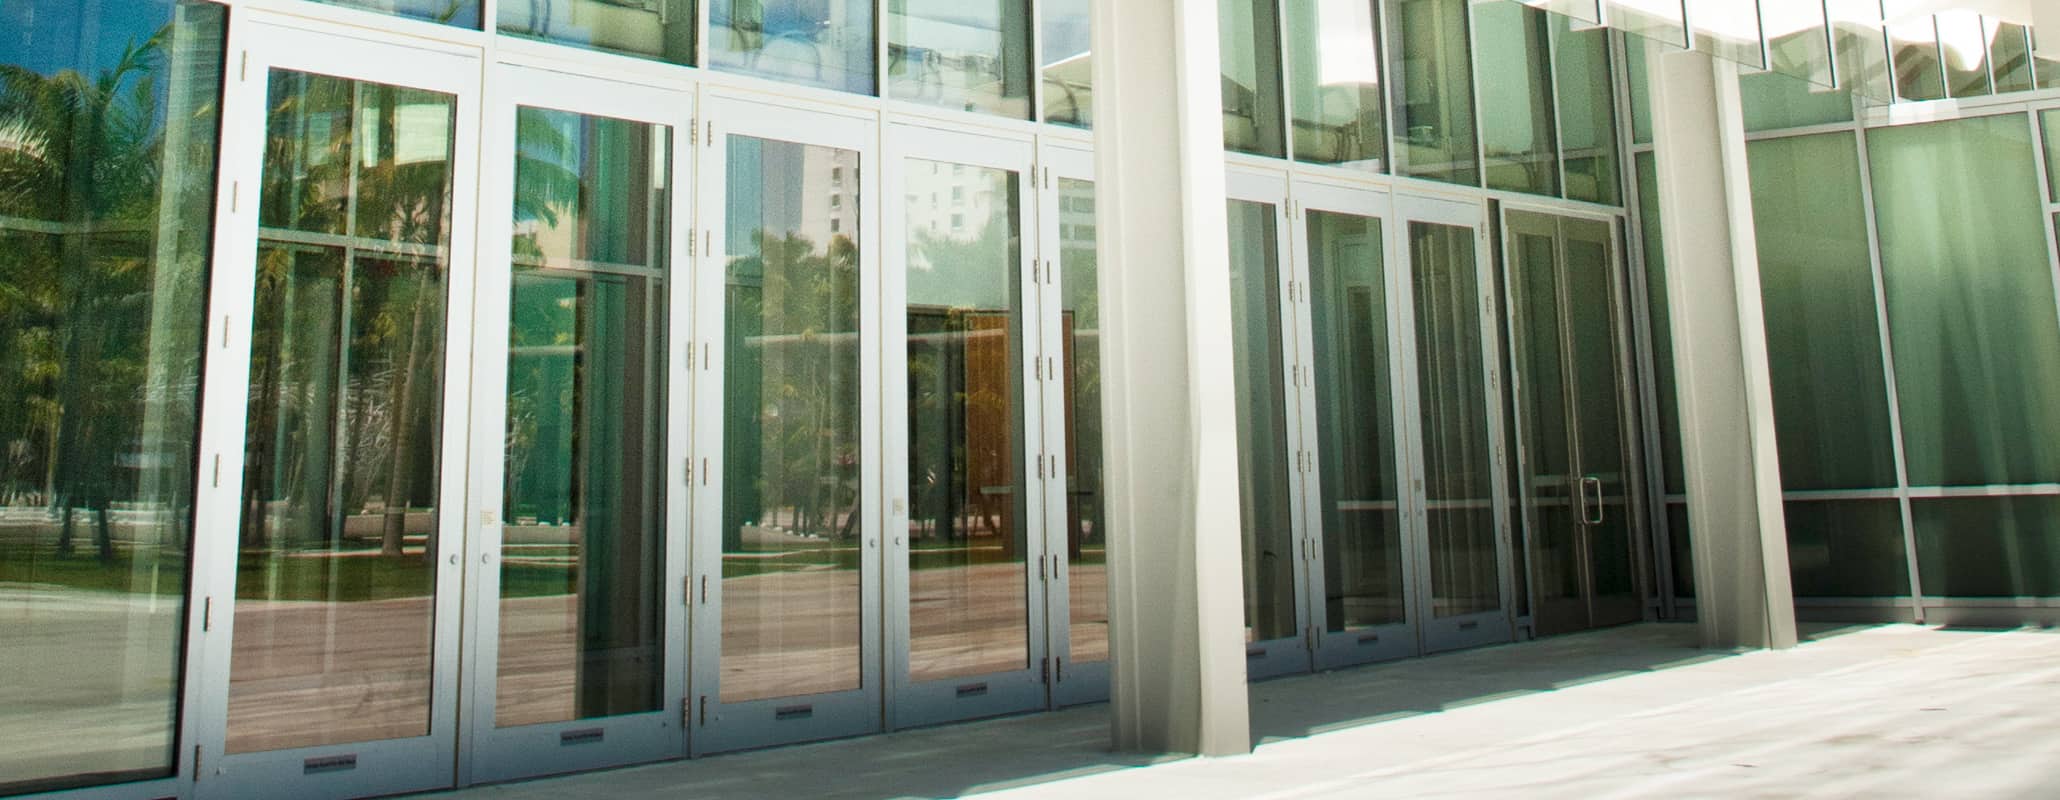 Angled view of commercial glass doors by Aldora, curtain wall windows above and surrounding doors to create building walls, side walk in front of building